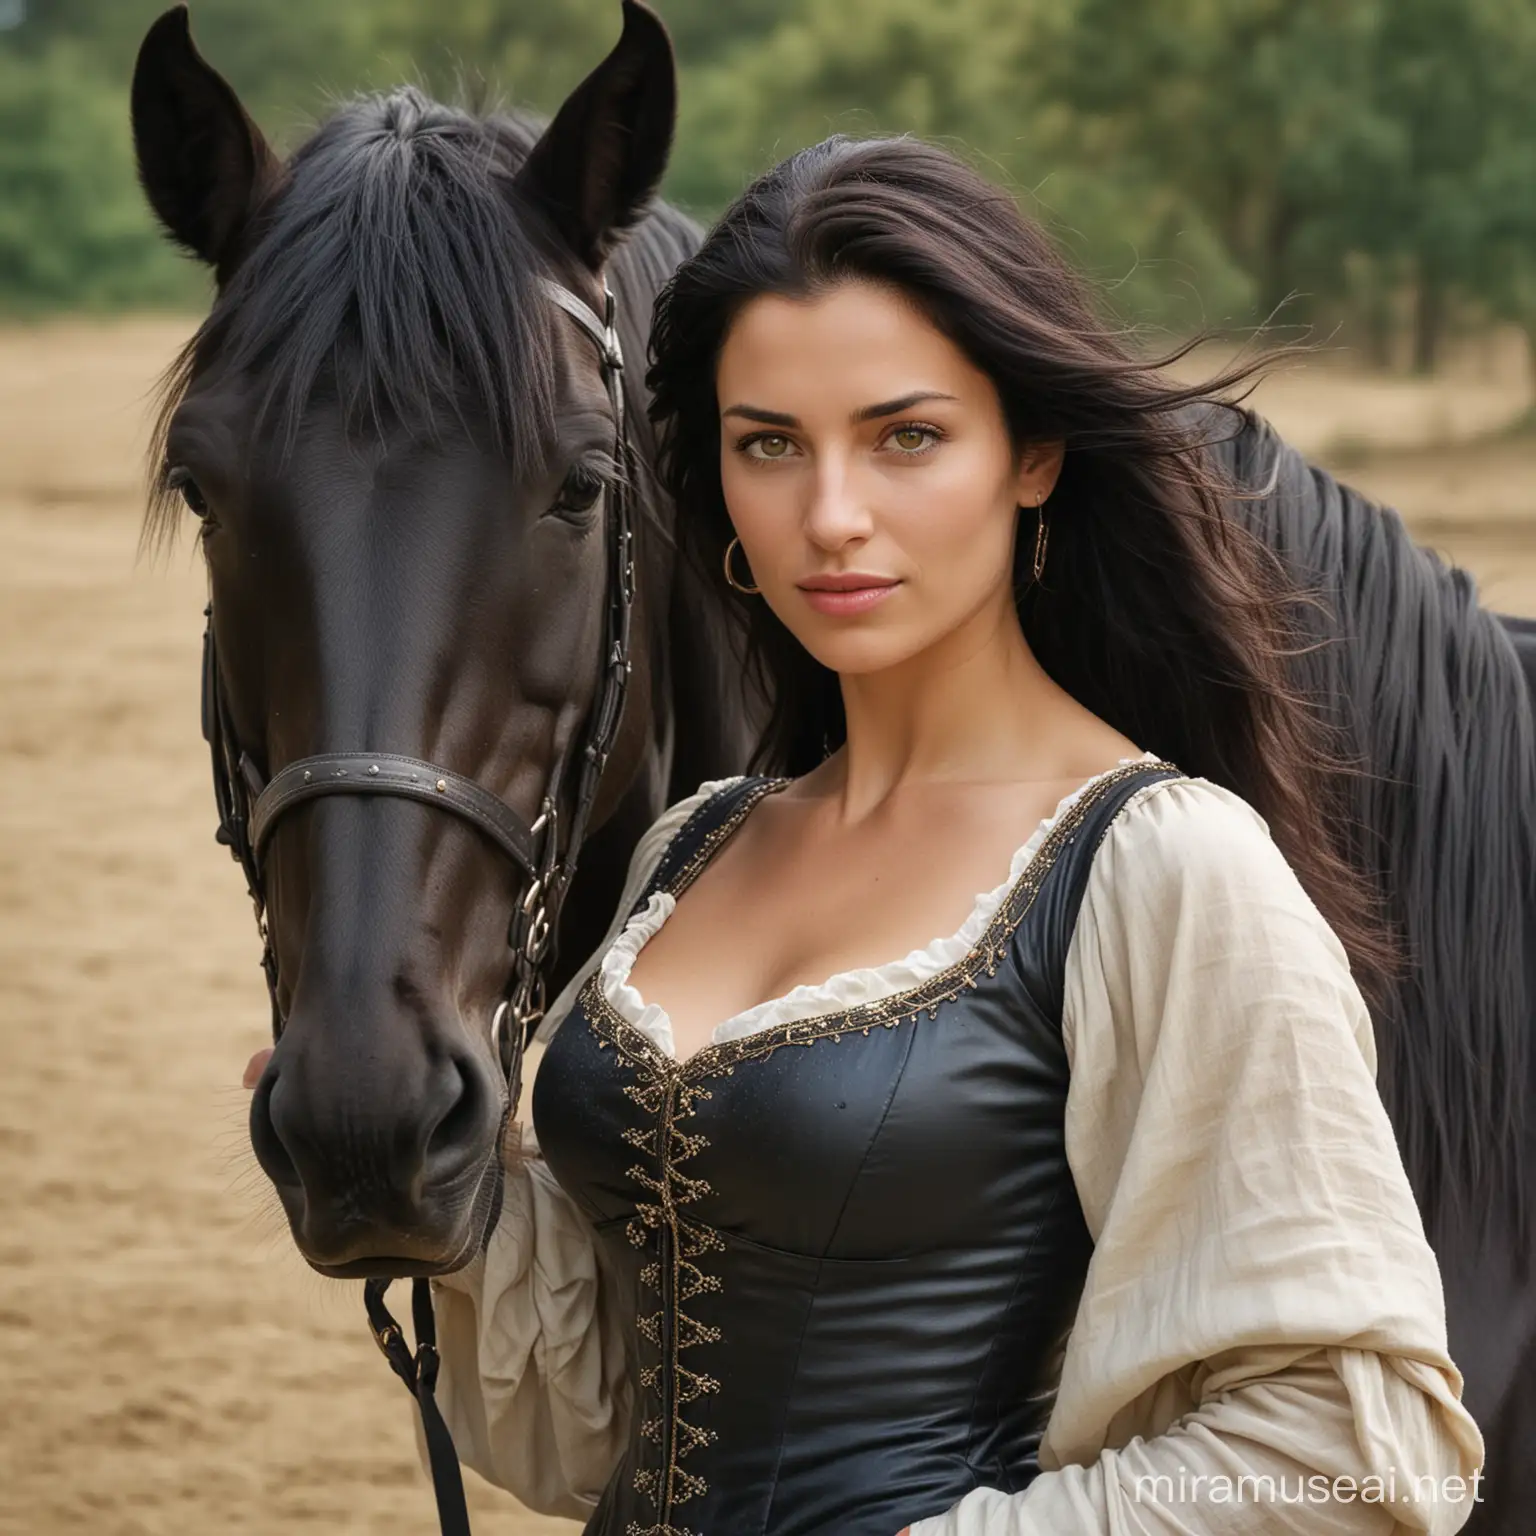 Charismatic Heroine on Black Horse Twelfth Century Woman of Independence and Freedom